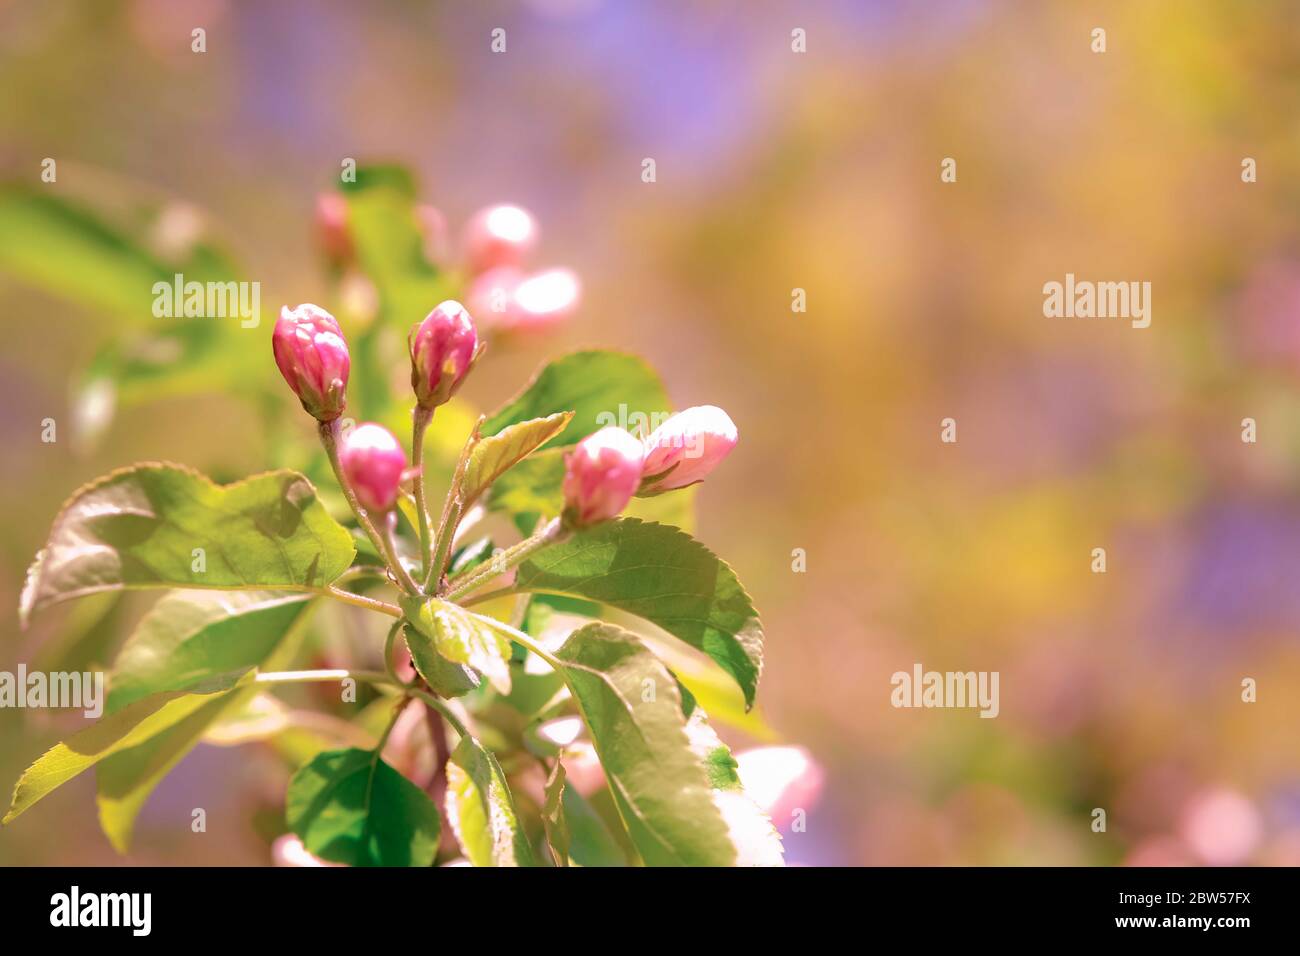 Natural spring blurred background with pink apple blossom buds. Selective focuse, place for text. Stock Photo